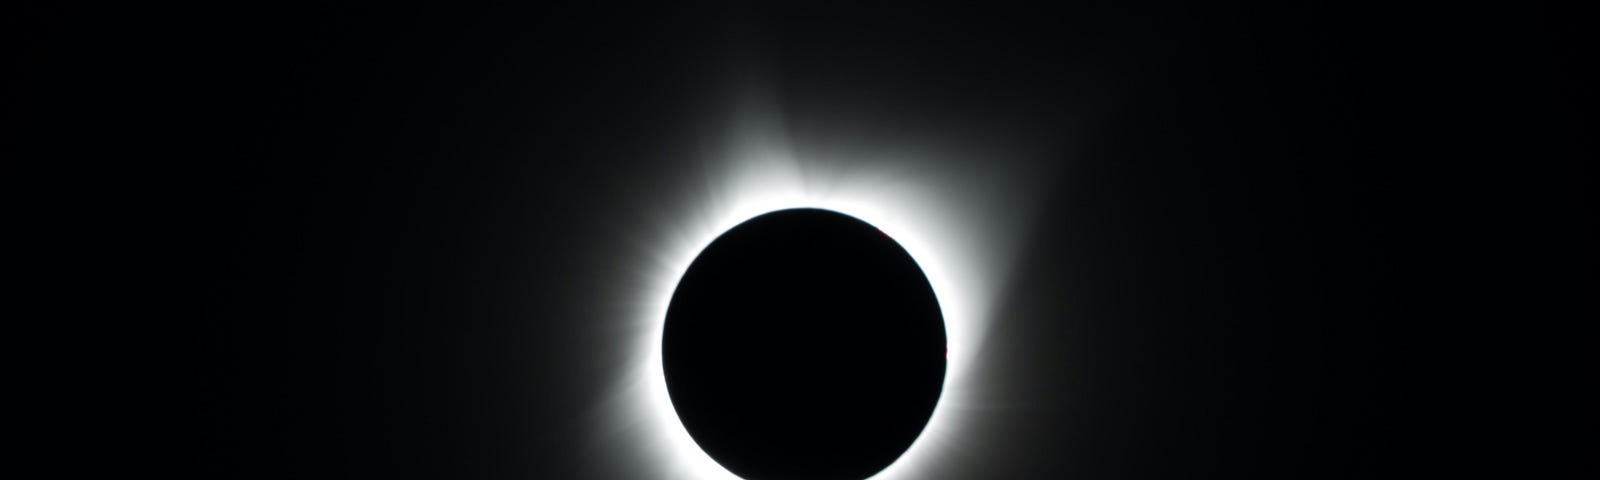 Photo of a total solar eclipse, with the white corona ring visible